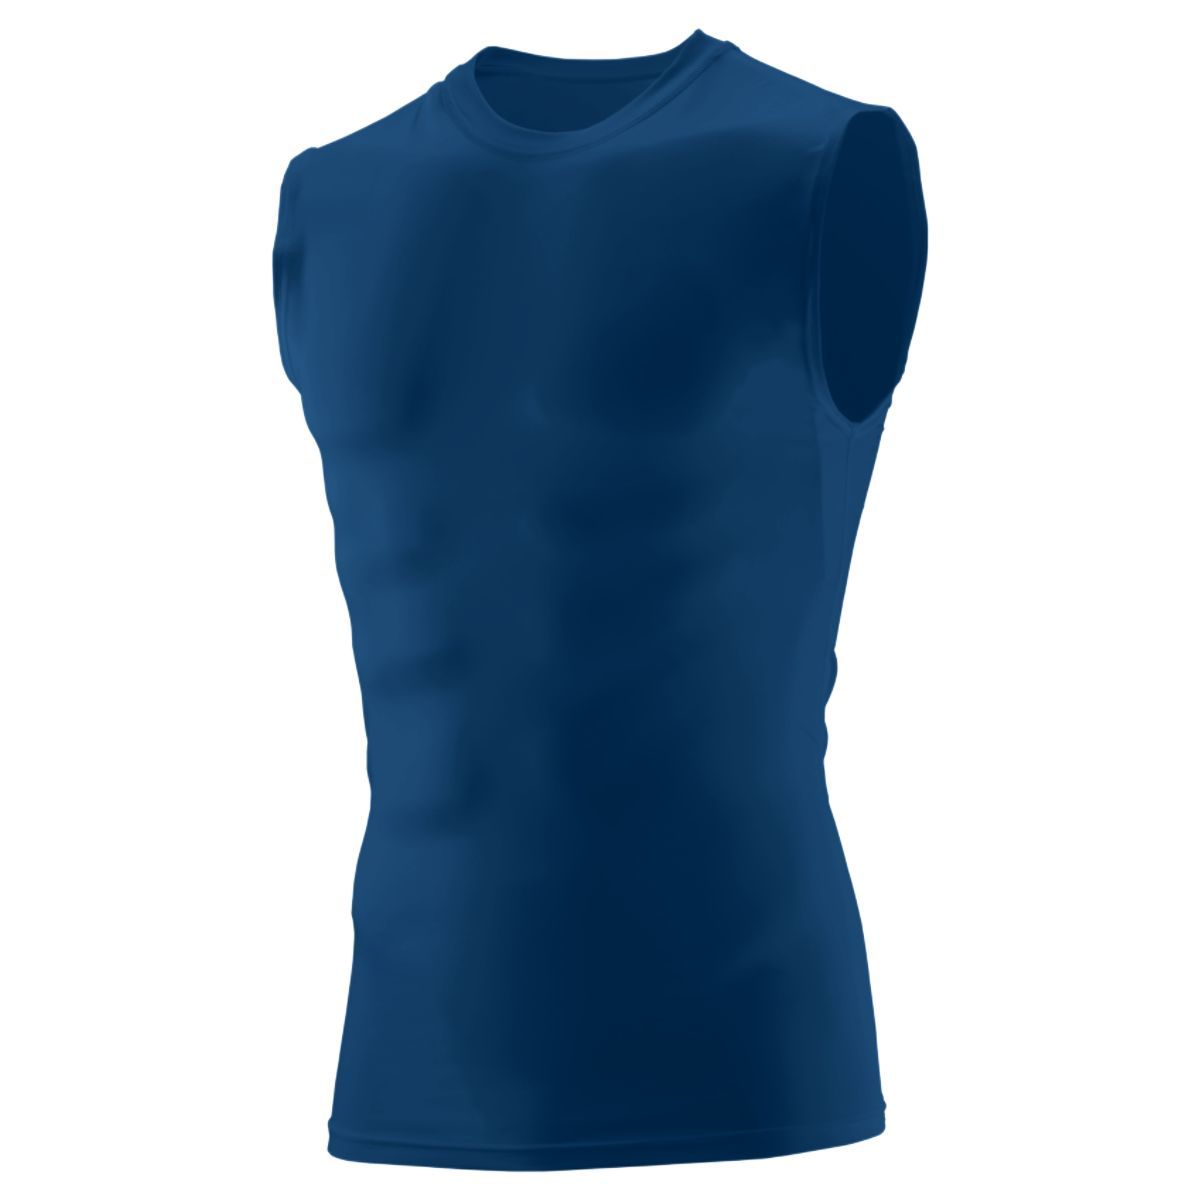 Augusta Sportswear Youth Hyperform Compression Sleeveless Tee in Navy  -Part of the Youth, Youth-Tee-Shirt, T-Shirts, Augusta-Products, Shirts product lines at KanaleyCreations.com